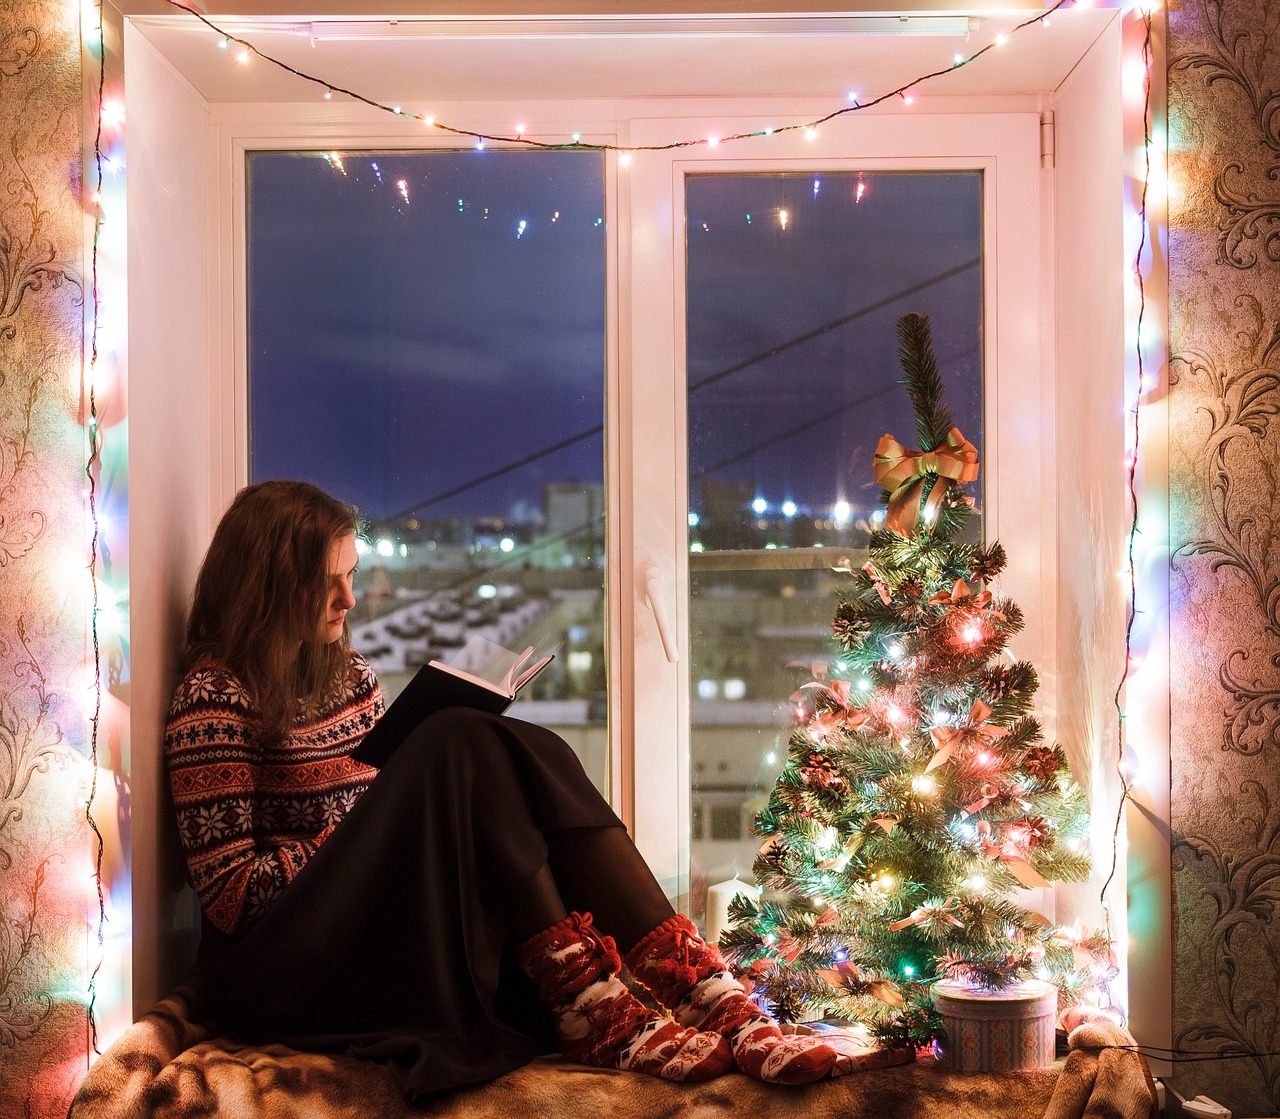 Woman sitting in window reading. Window decorated with Christmas lights.